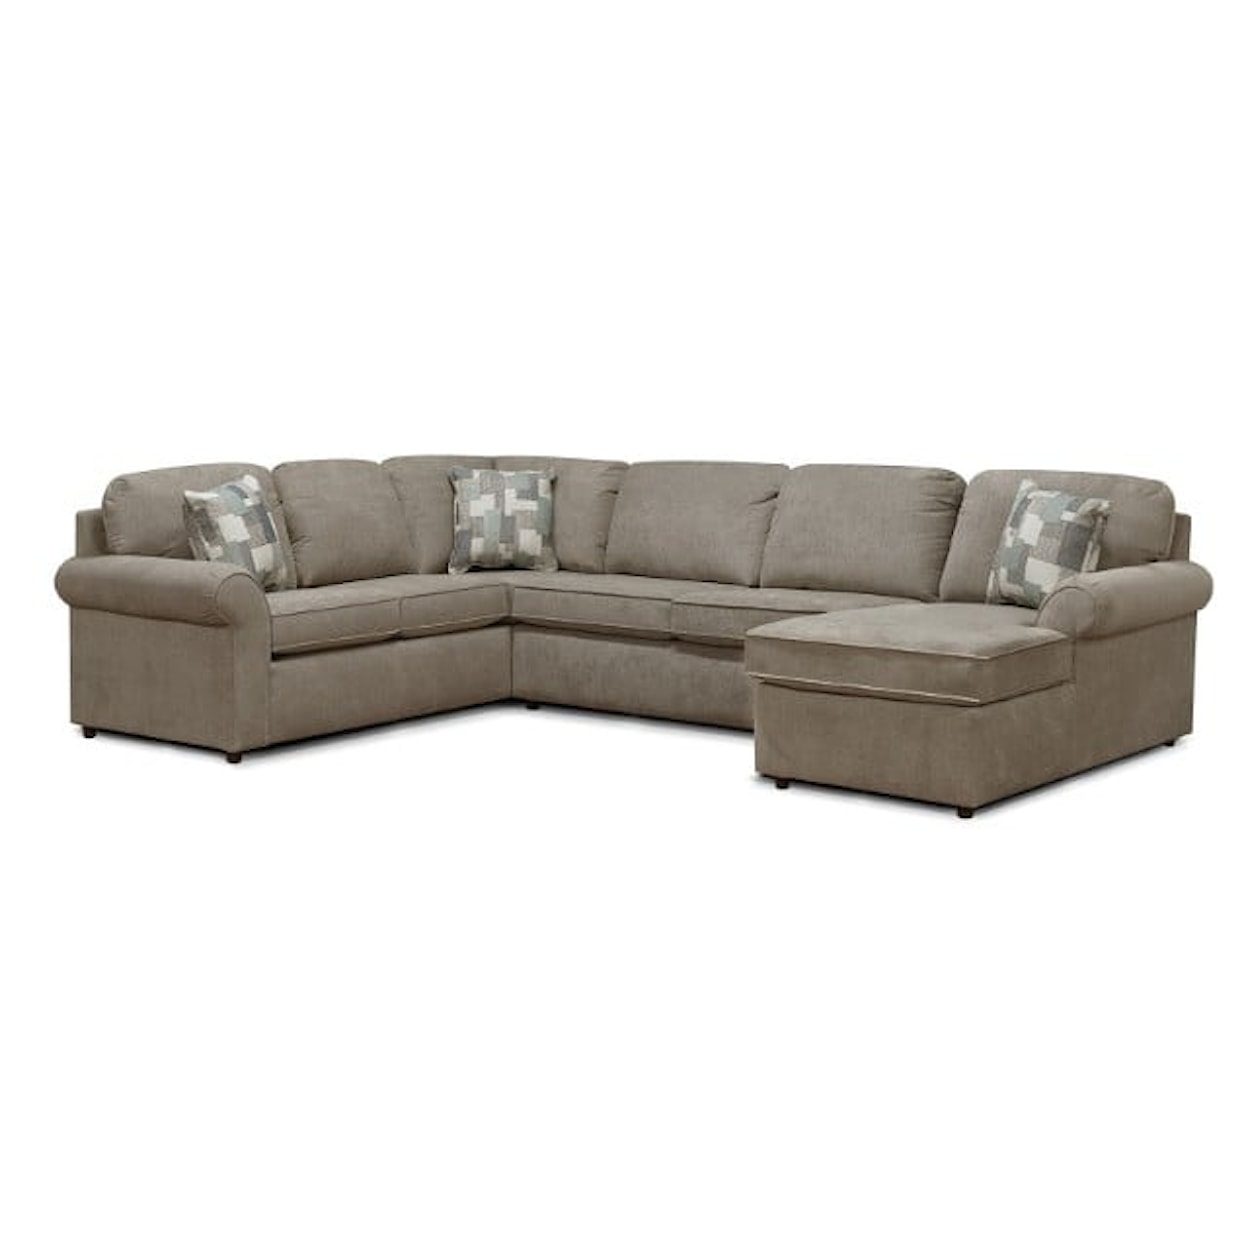 England 2400/X Series - Malibu 5-6 Seat (right side) Chaise Sectional